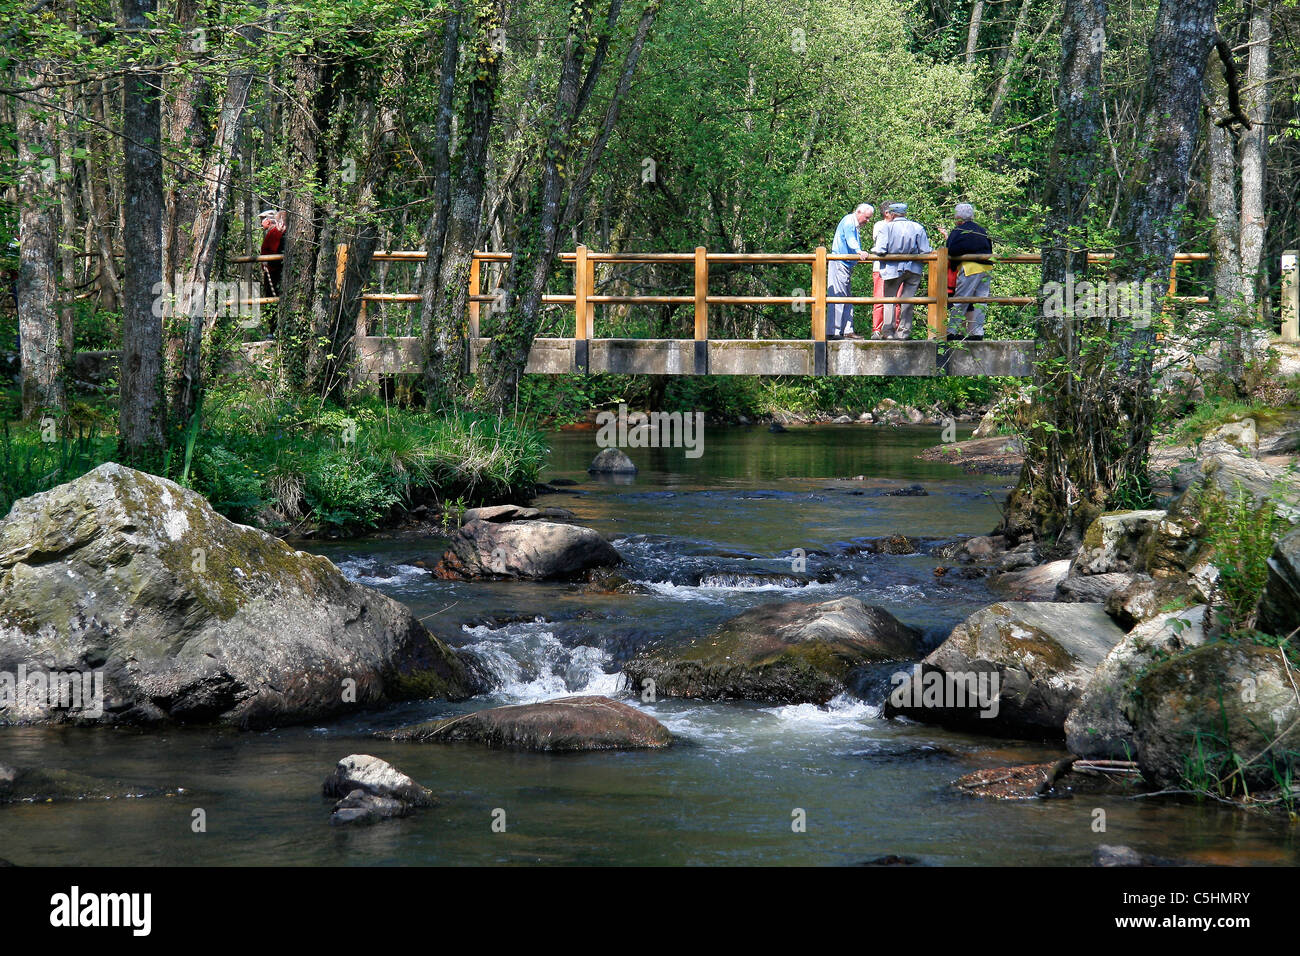 Seniors chat on a wooden bridge over a river at the "Fosse Arthour" (French arthurian site and climbing site, Normandy). Stock Photo